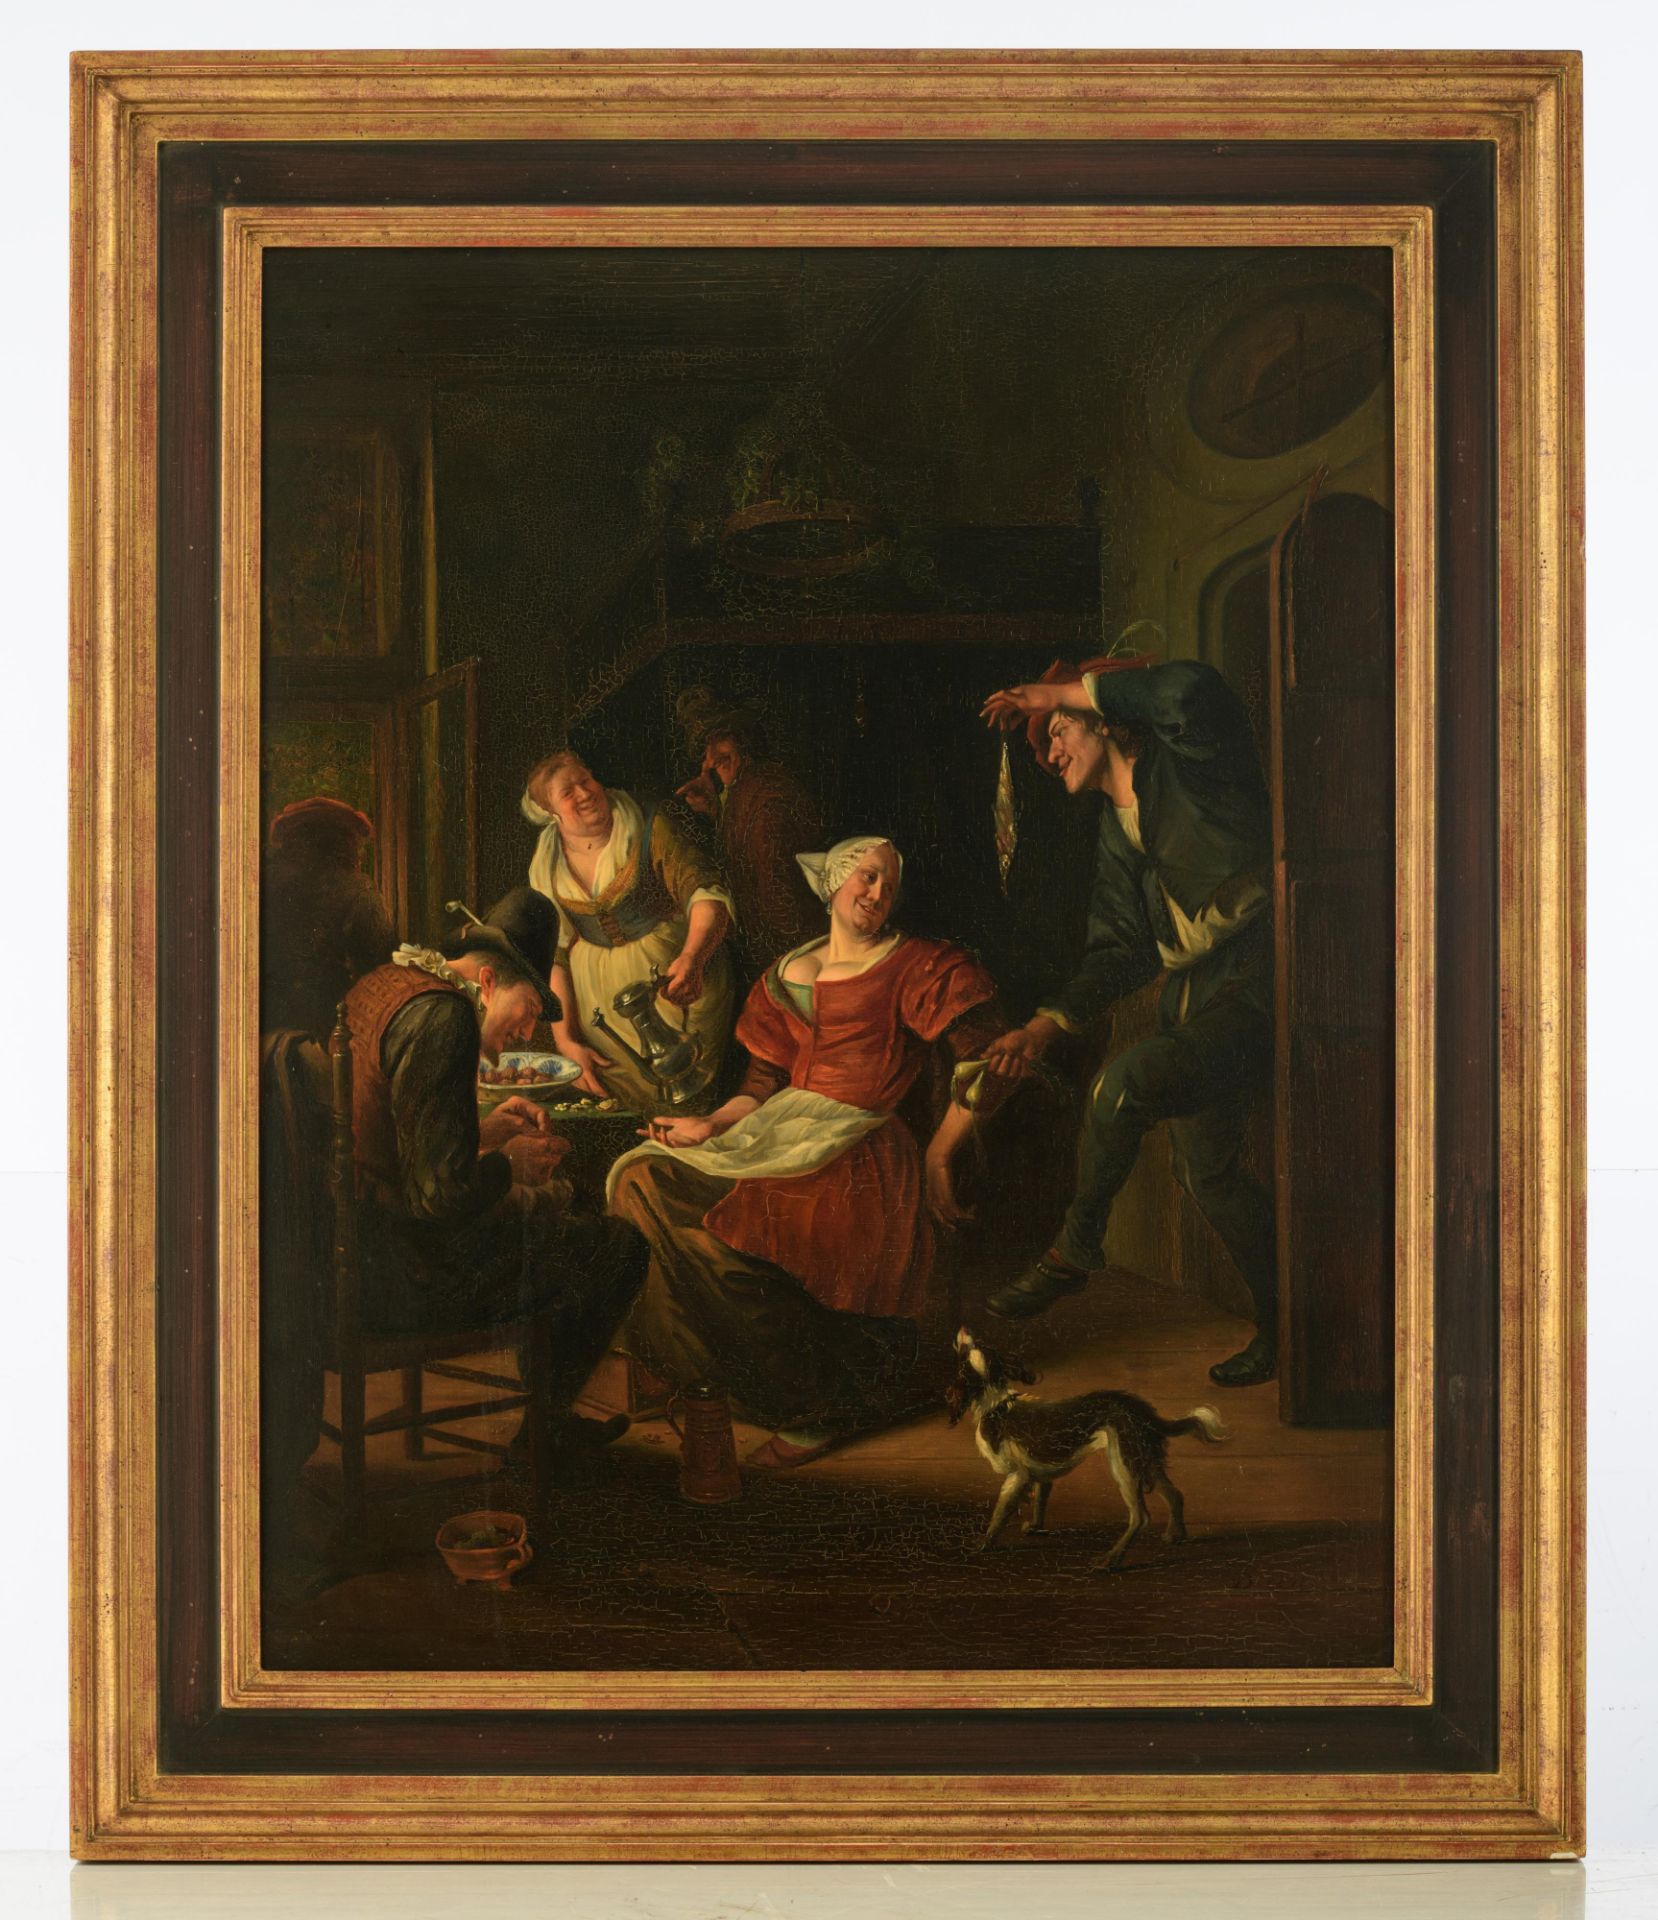 A fine copy after a famous genre painting by Jan Steen (signed 'J. Steen'), 'The Love Proposal', 19t - Image 2 of 10